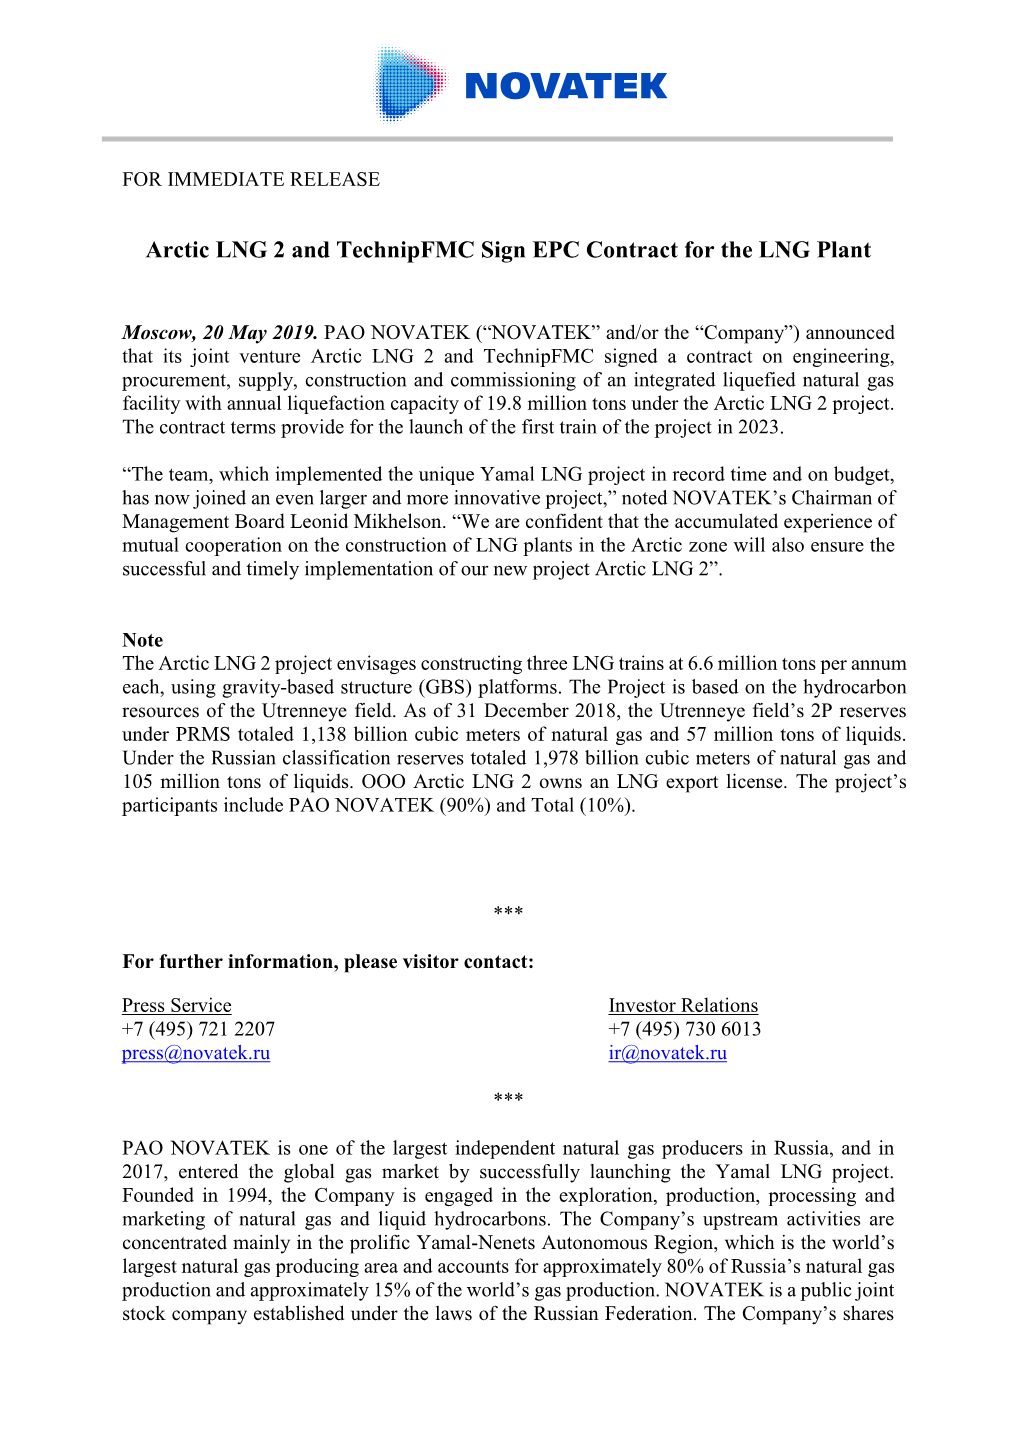 Arctic LNG 2 and Technipfmc Sign EPC Contract for the LNG Plant